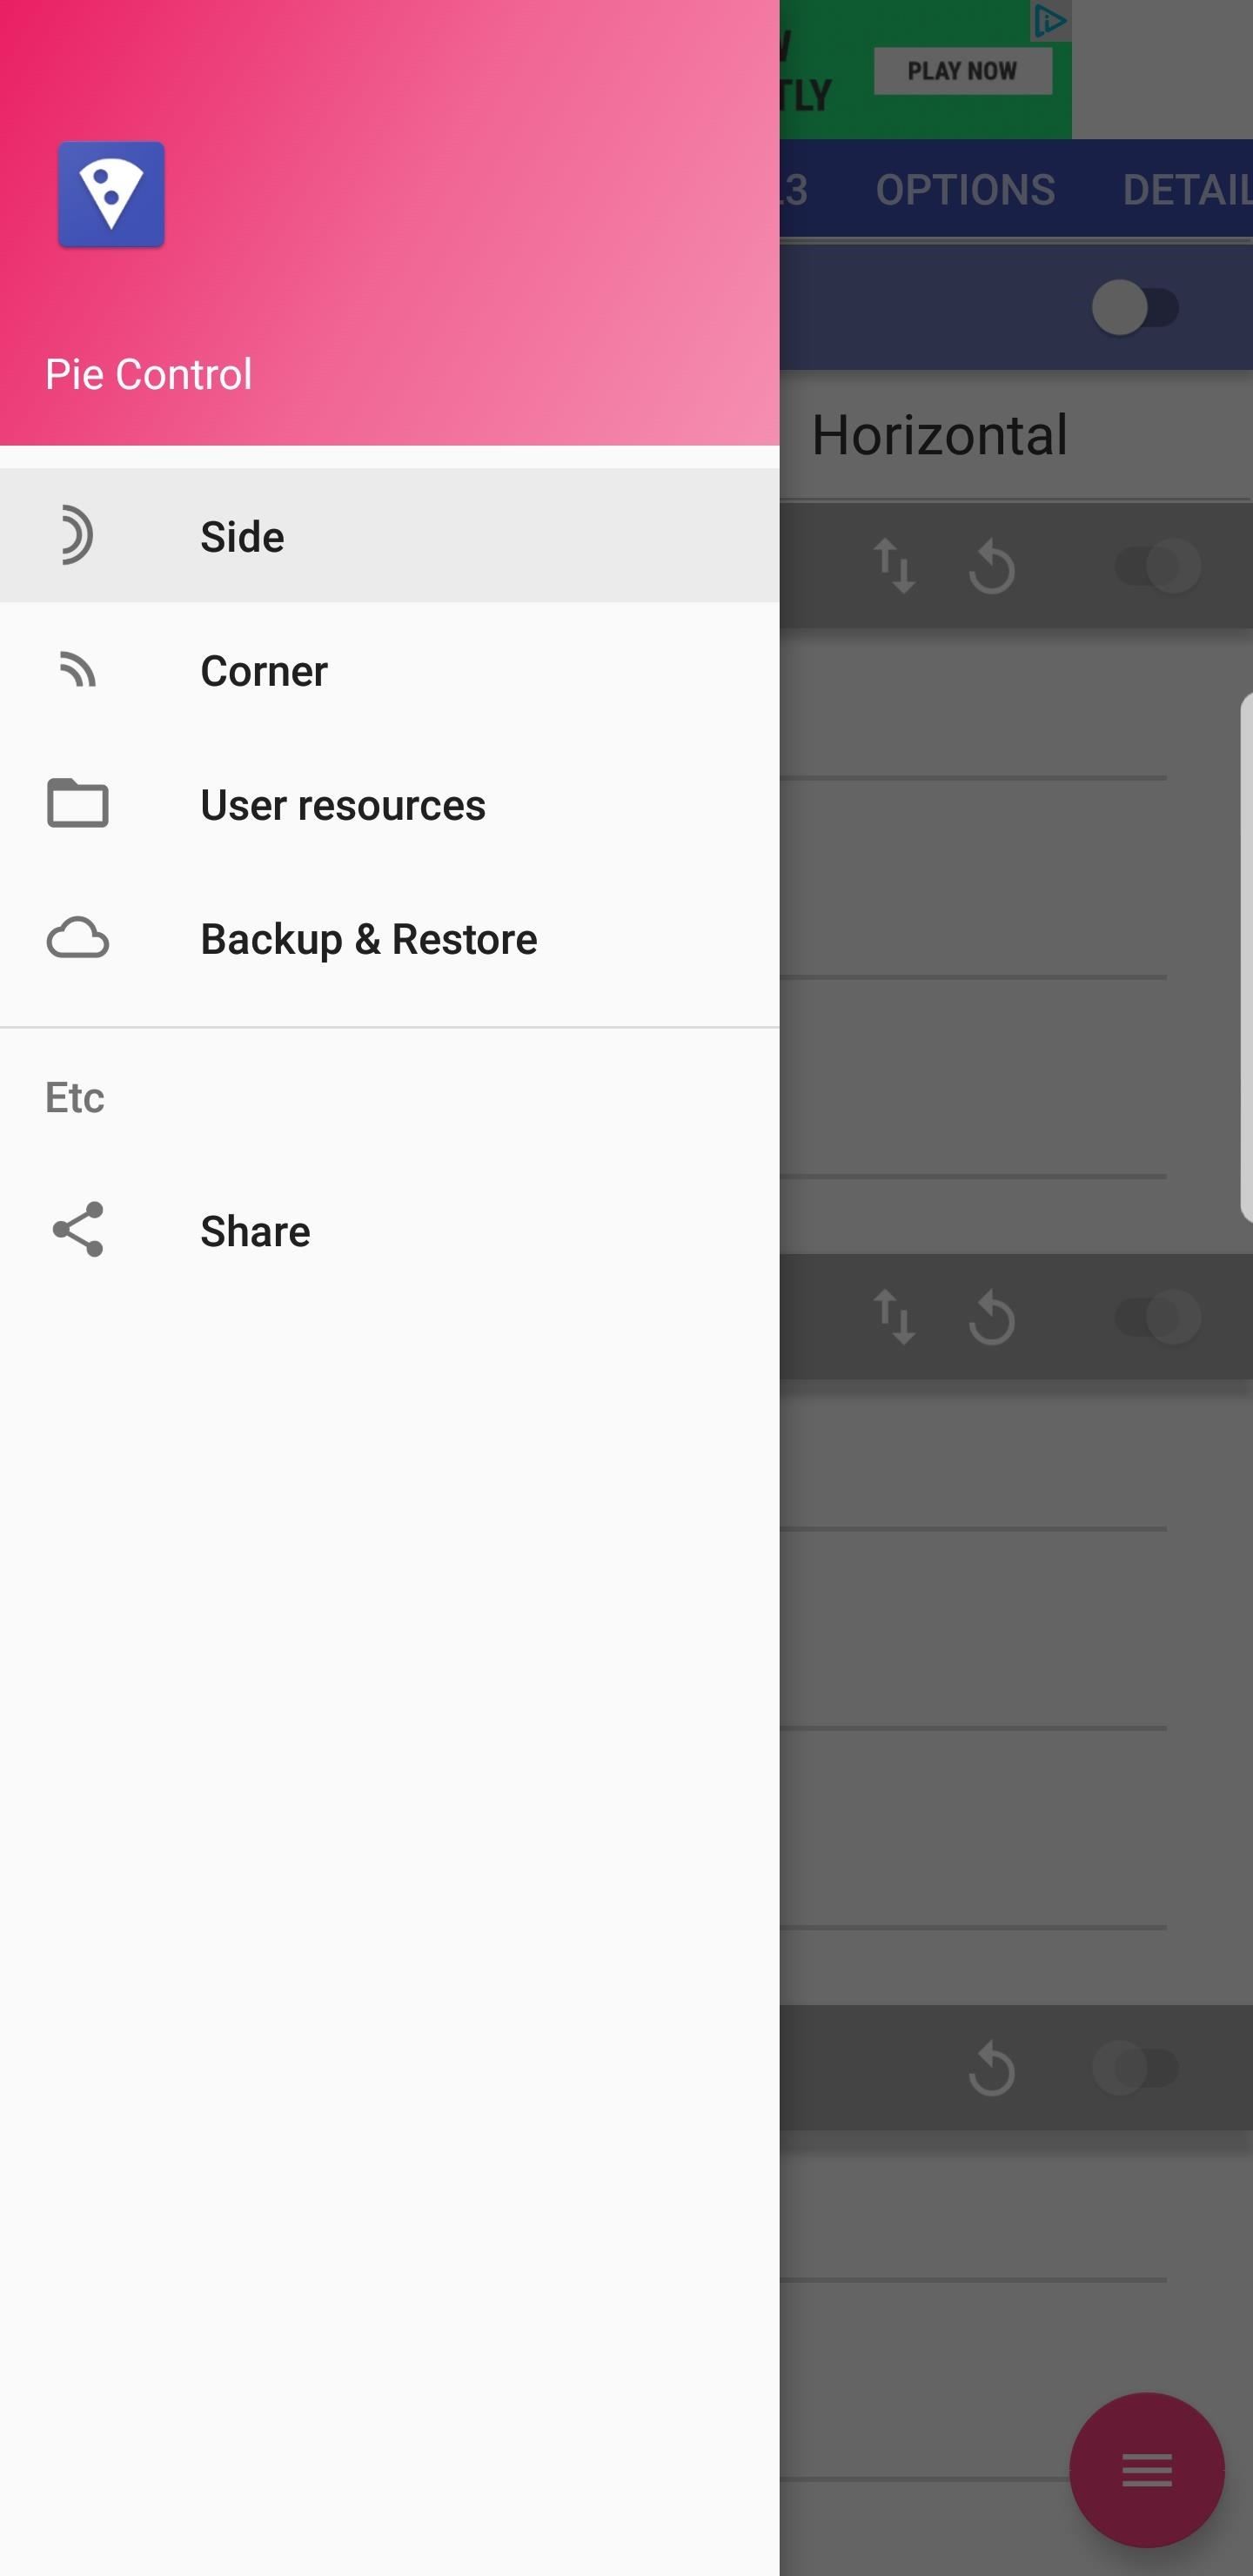 Replace Your Galaxy S8's Nav Bar with Pie Controls to Prevent Screen Burn-In